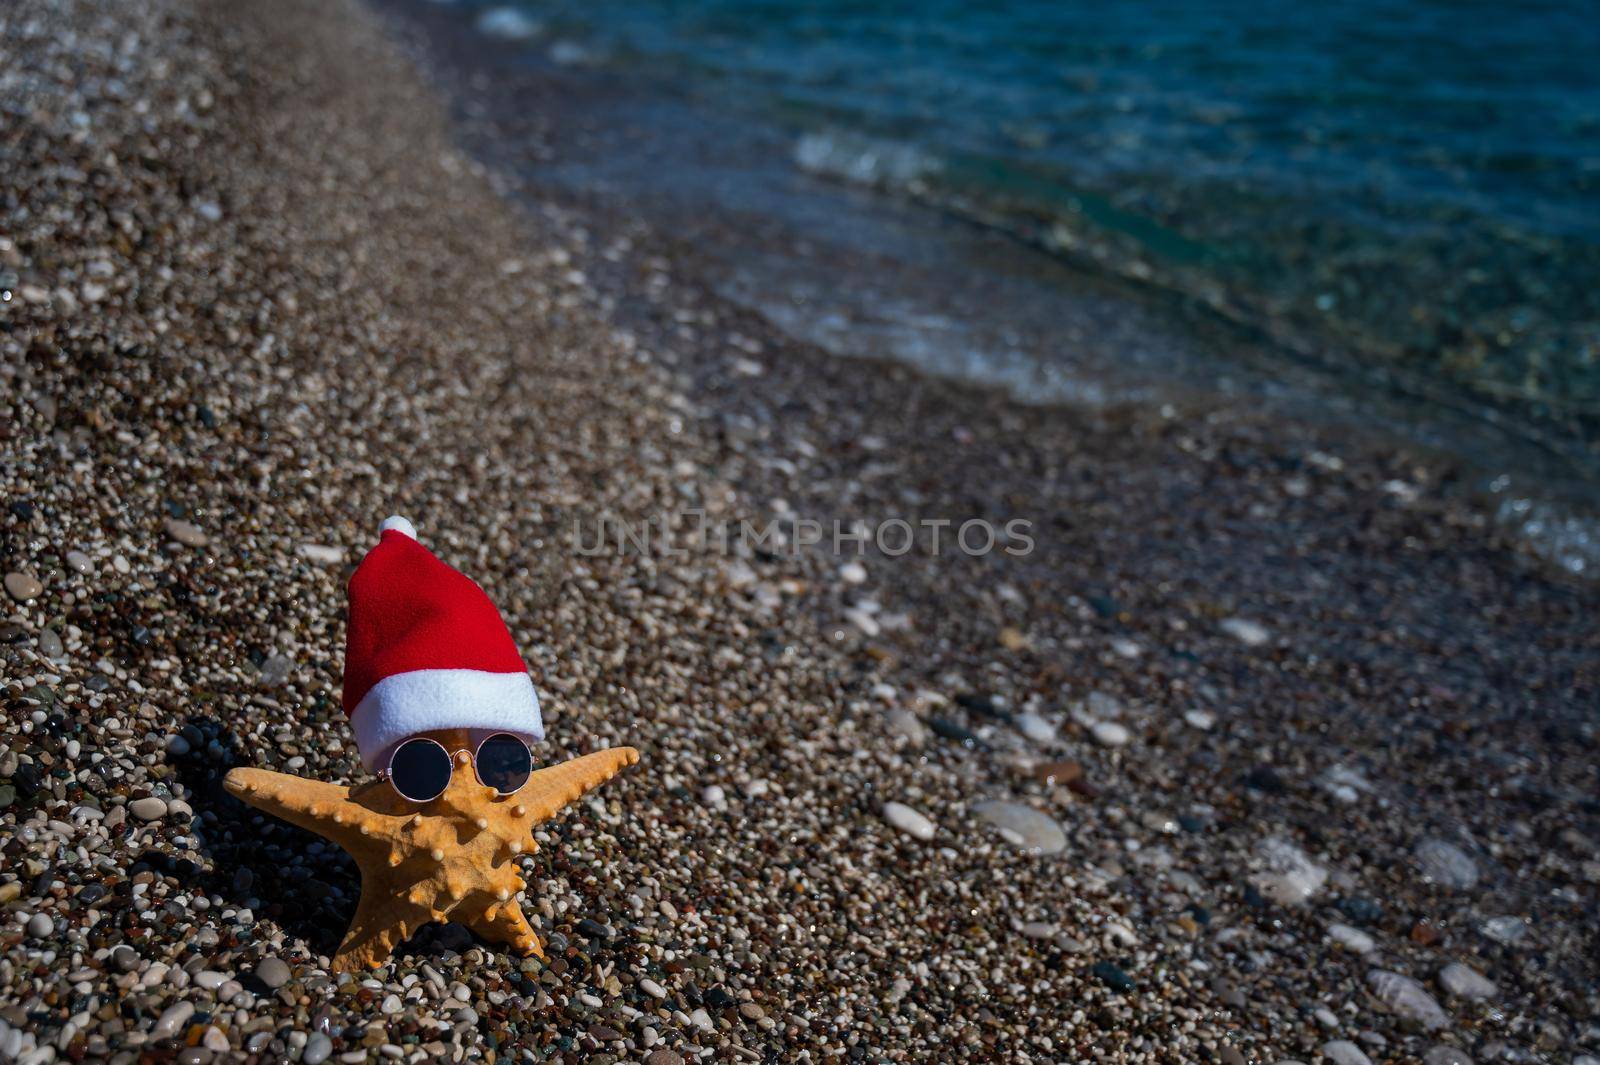 Starfish in santa claus hat and sunglasses on a pebble beach by the sea